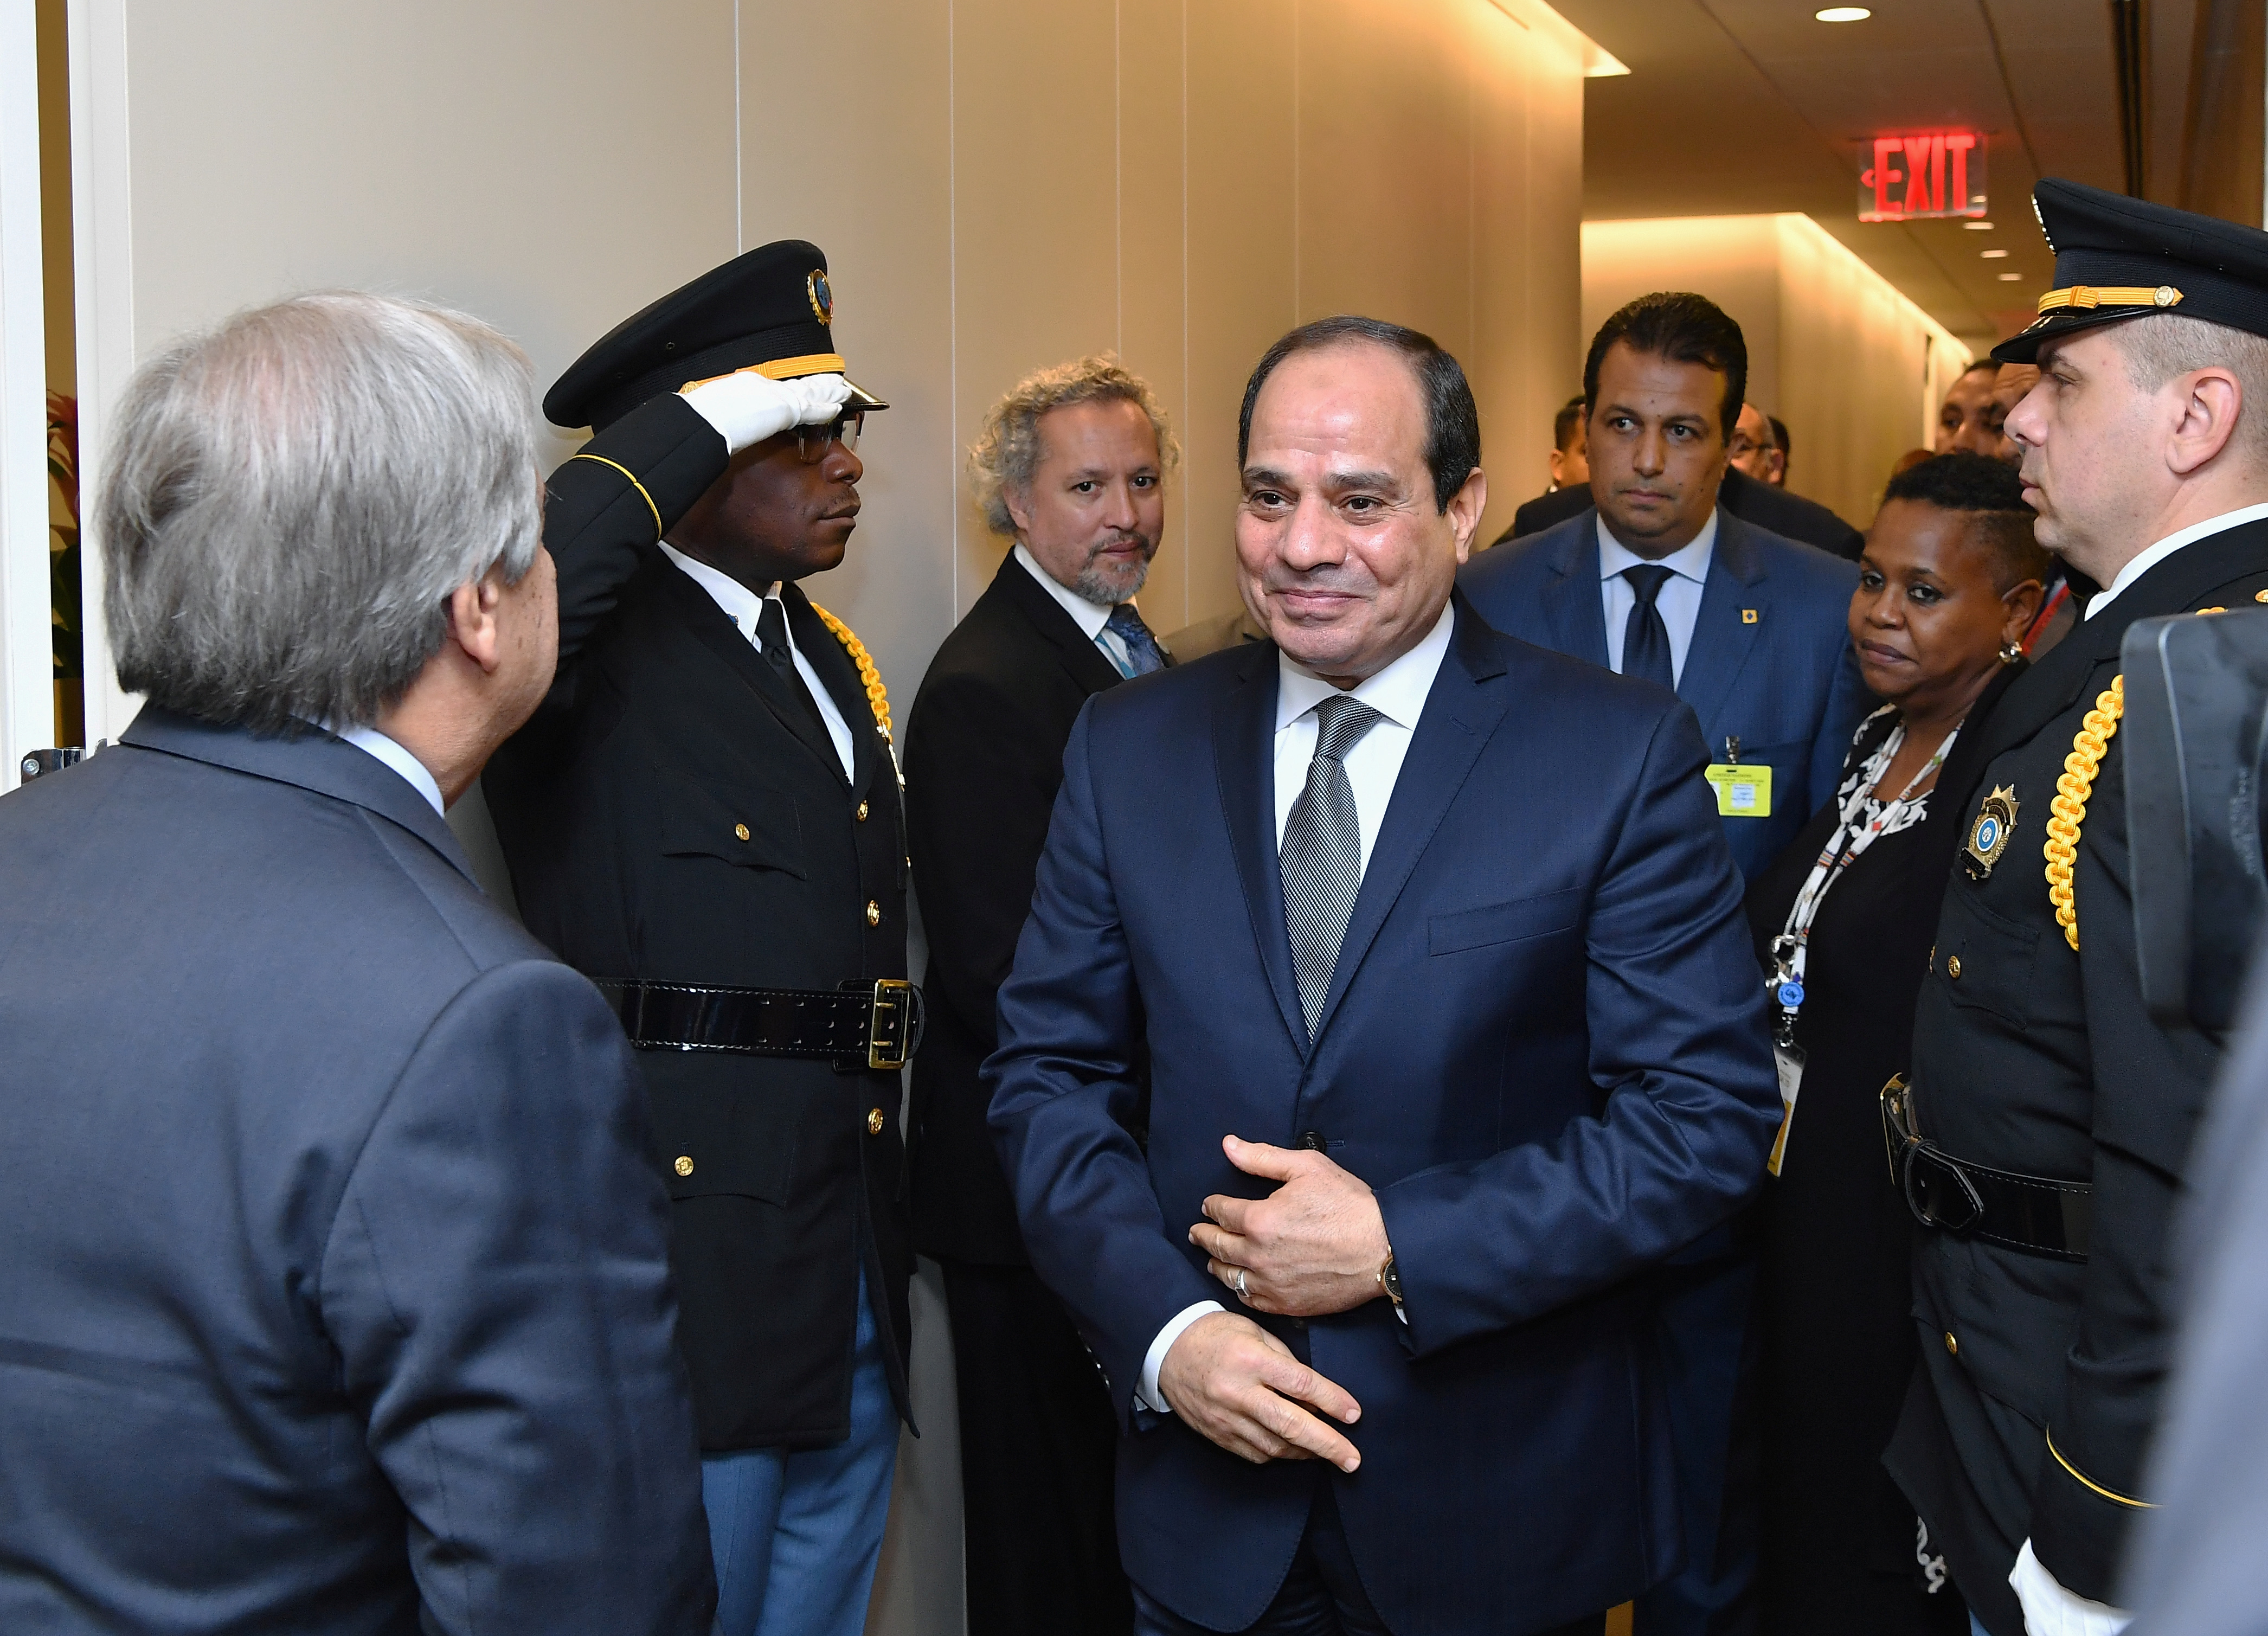 President of the Arab Republic of Egypt, Abdel Fattah El-Sisi arrives at the United Nations headquarters in New York, U.S., September 25, 2018. Angela Weiss/Pool via Reuters